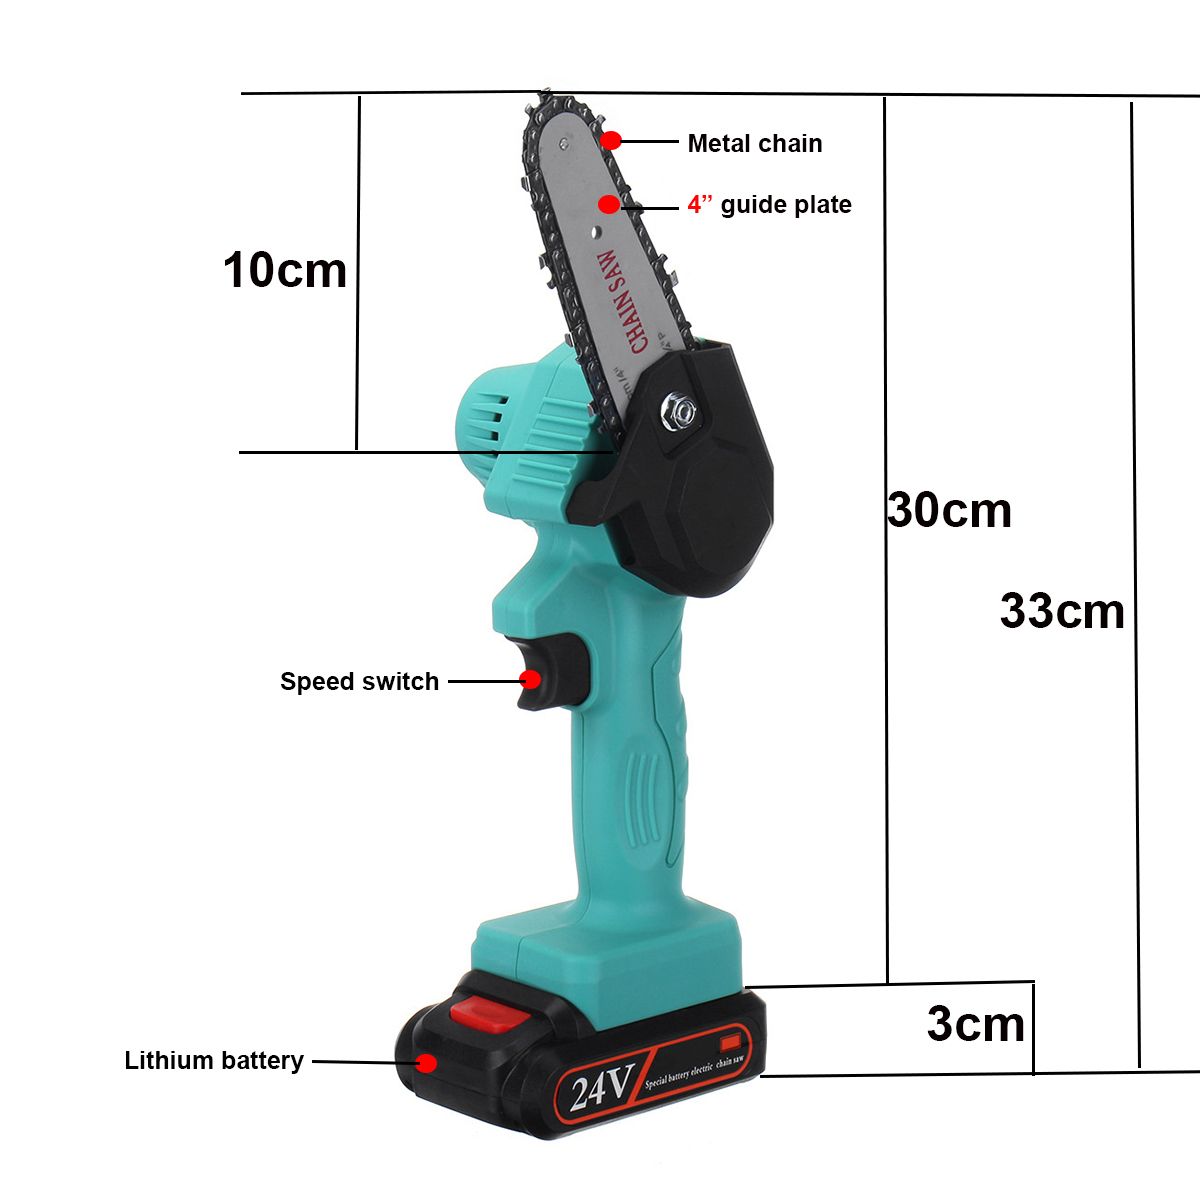 24V-Rechargeable-Portable-Electric-Saws-Household-Woodworking-Chainsaw-Garden-Mini-Electric-Chain-Sa-1764820